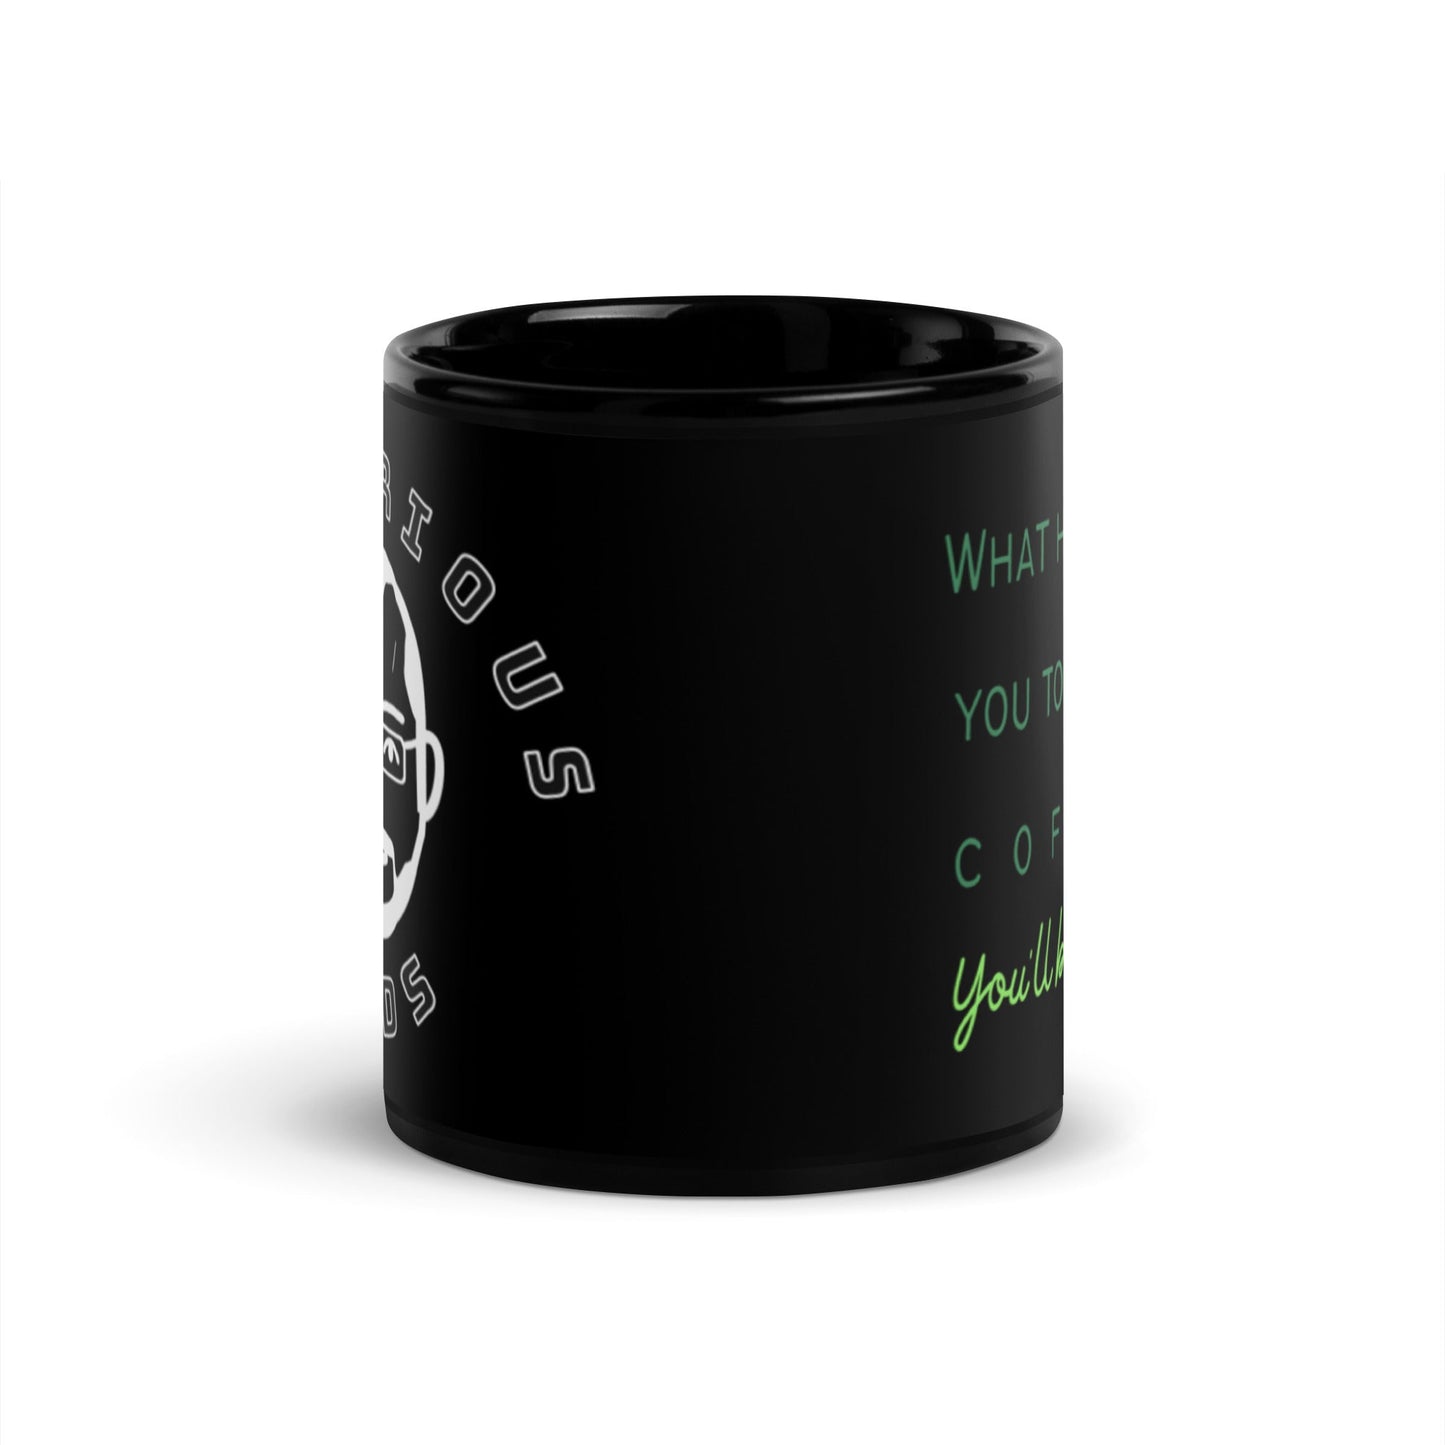 What happens if you touch Dad’s coffee?-Mug - Hil-arious Dads